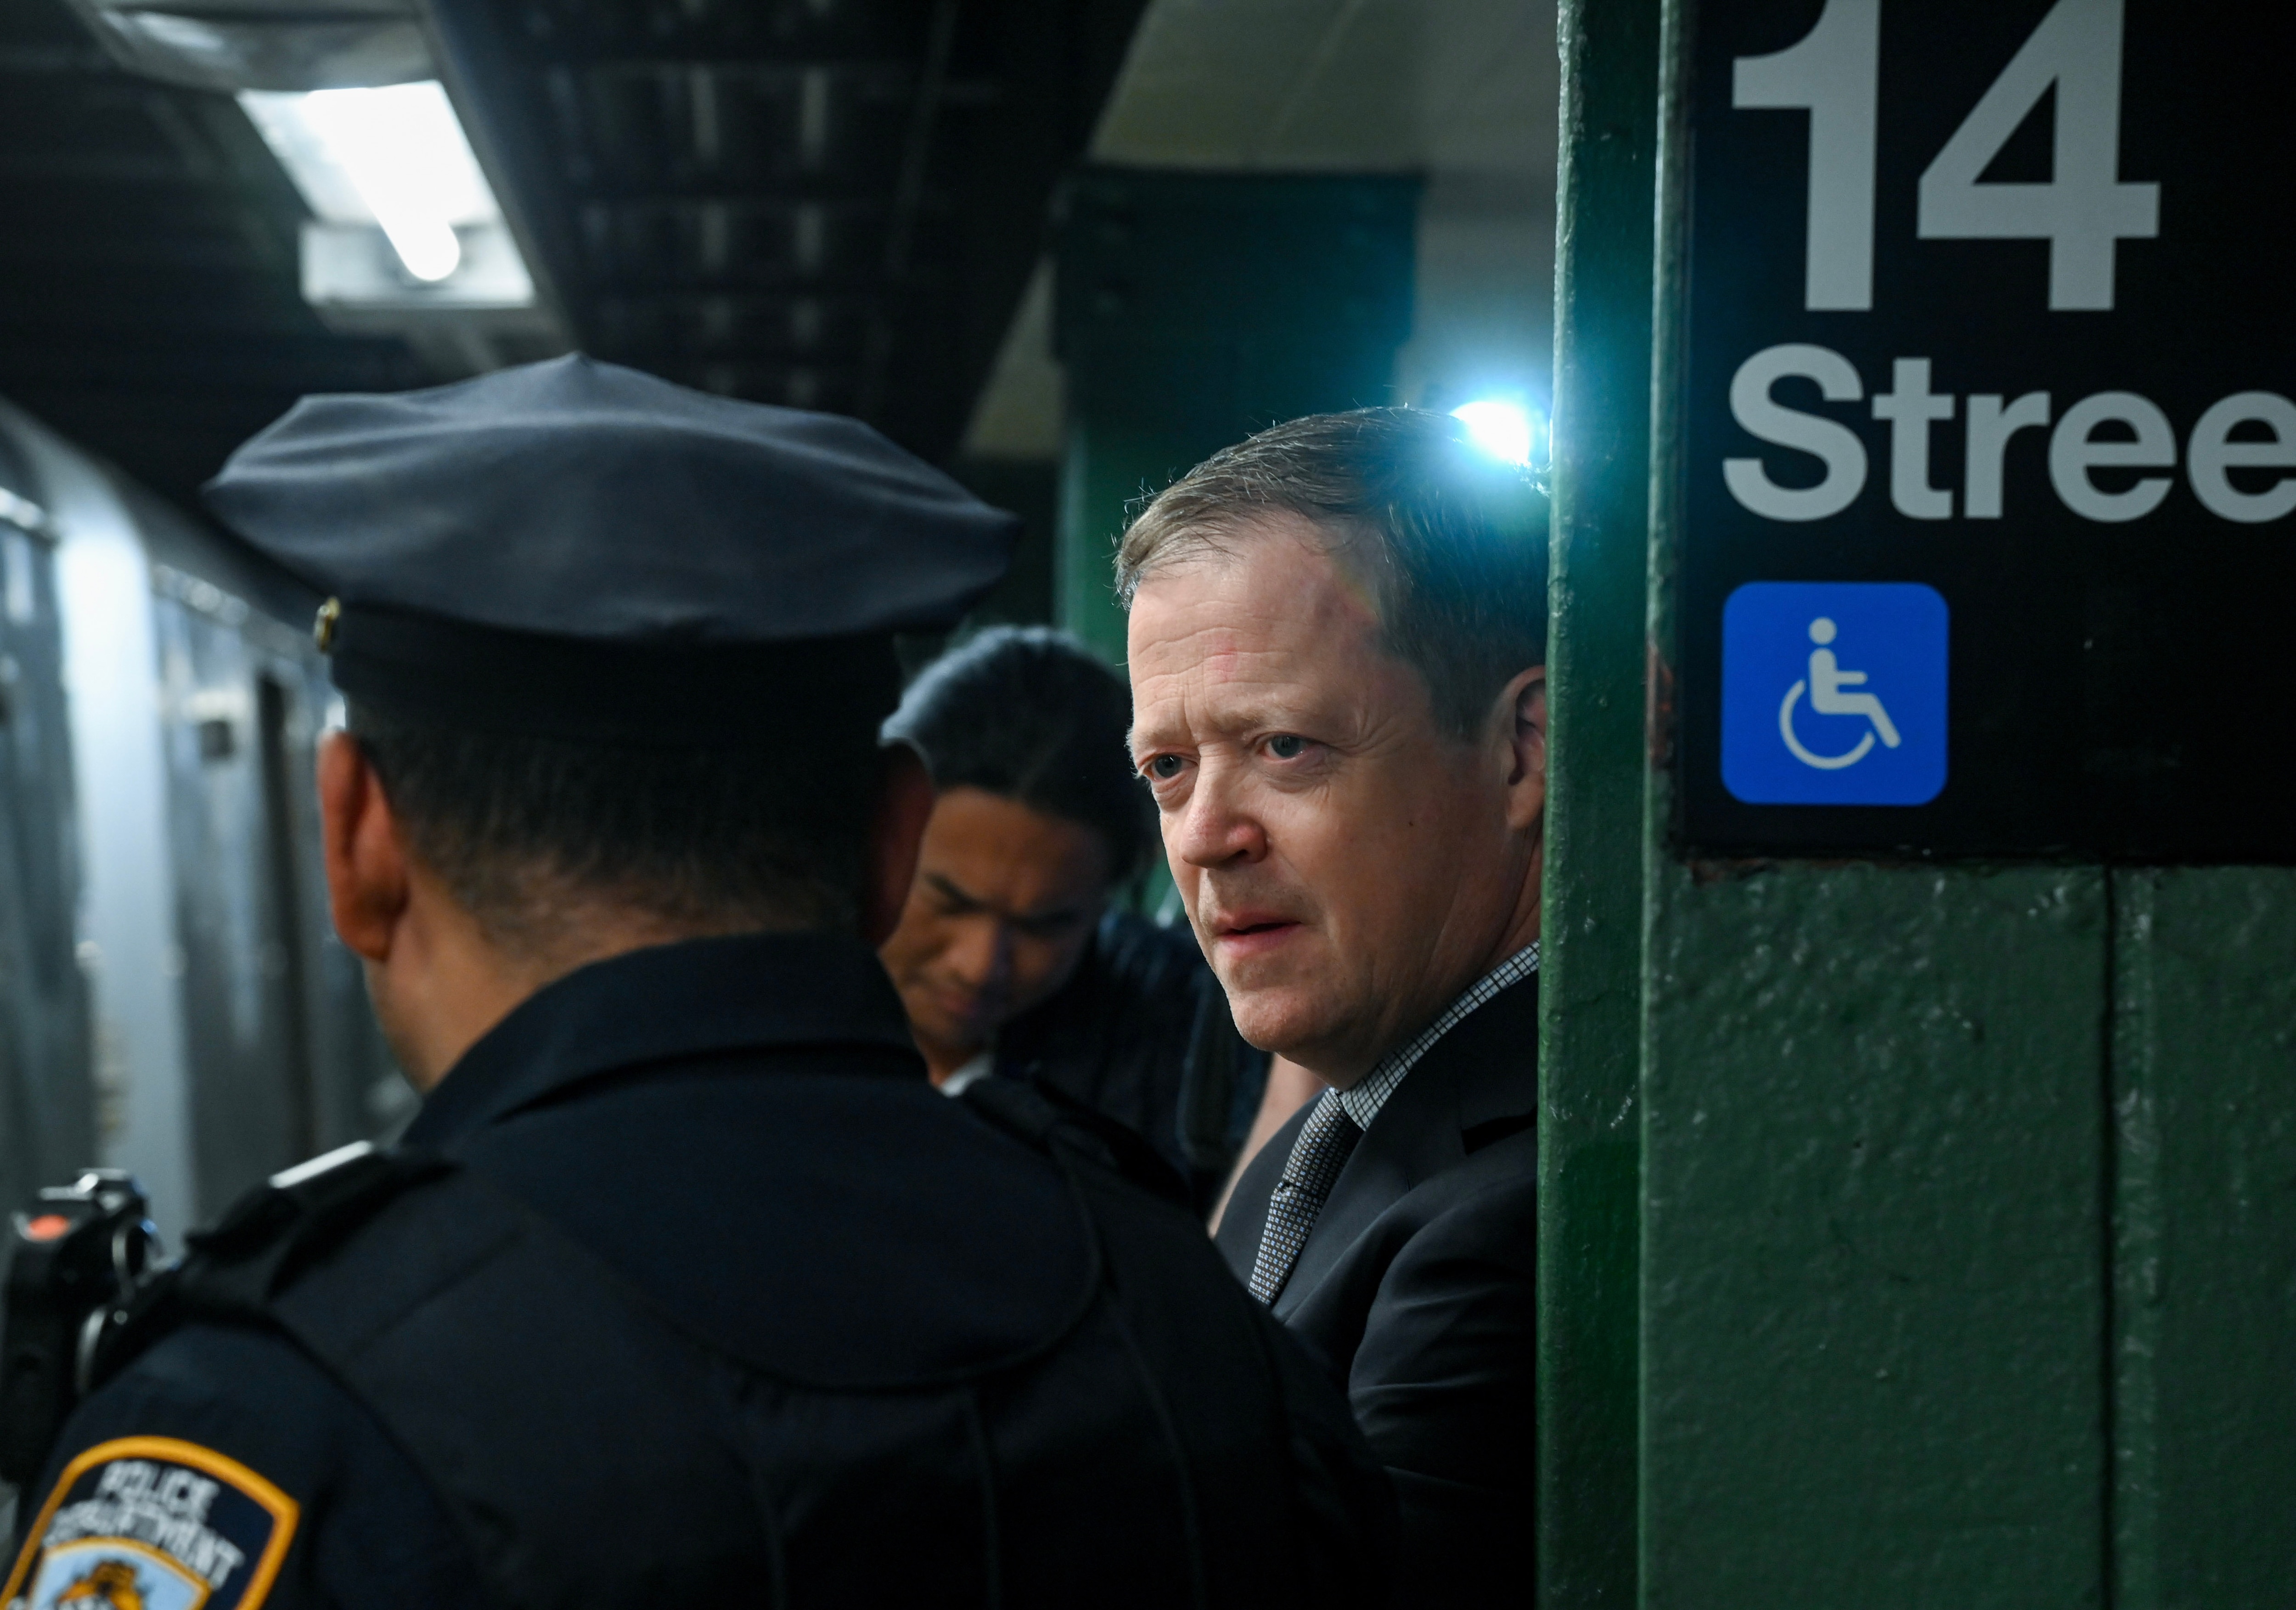 PHOTOS: NYC Transit Leadership Ride Subway to Ensure Public Safety Announcements are Being Made by Conductors on Trains